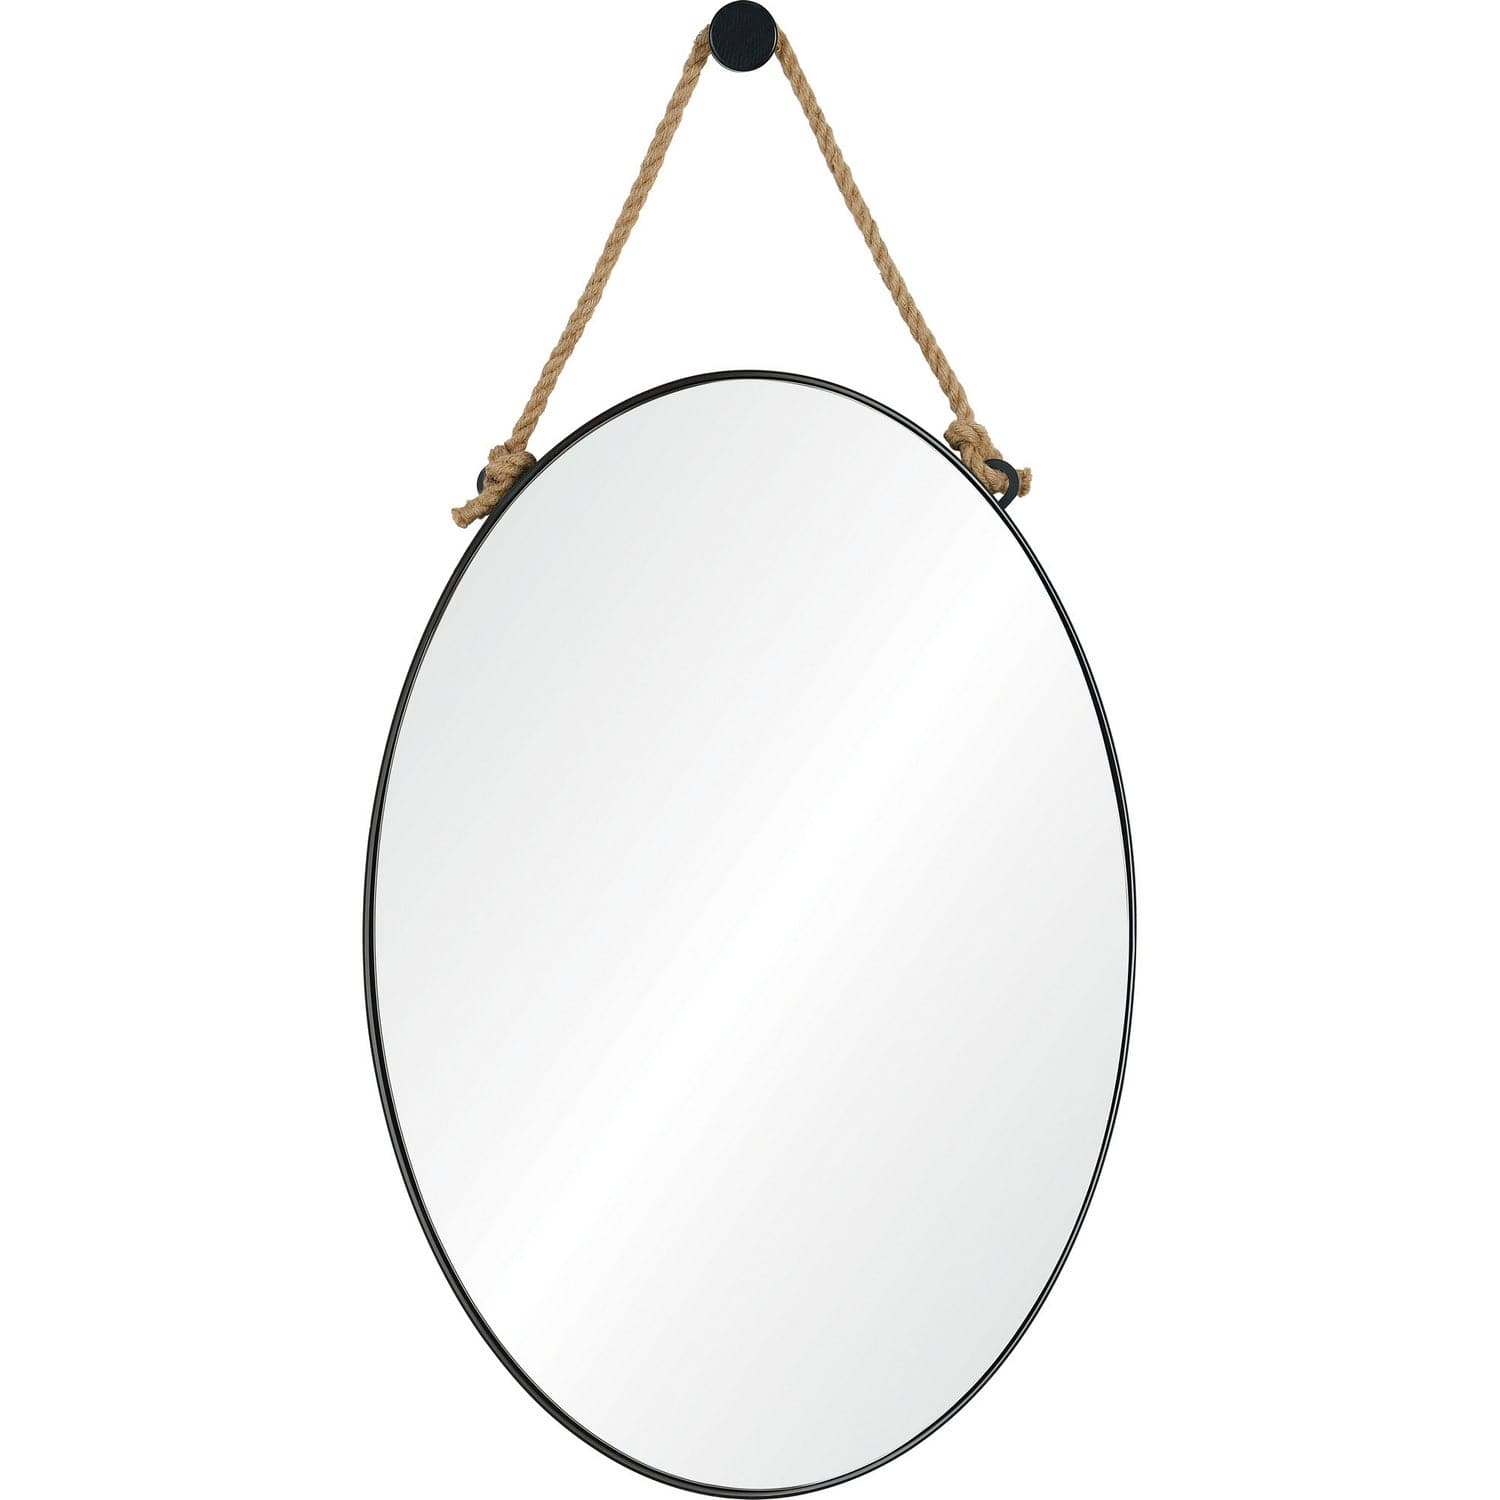 Renwil - MT2365 - Mirrors/Pictures - Mirrors-Oval/Rd.